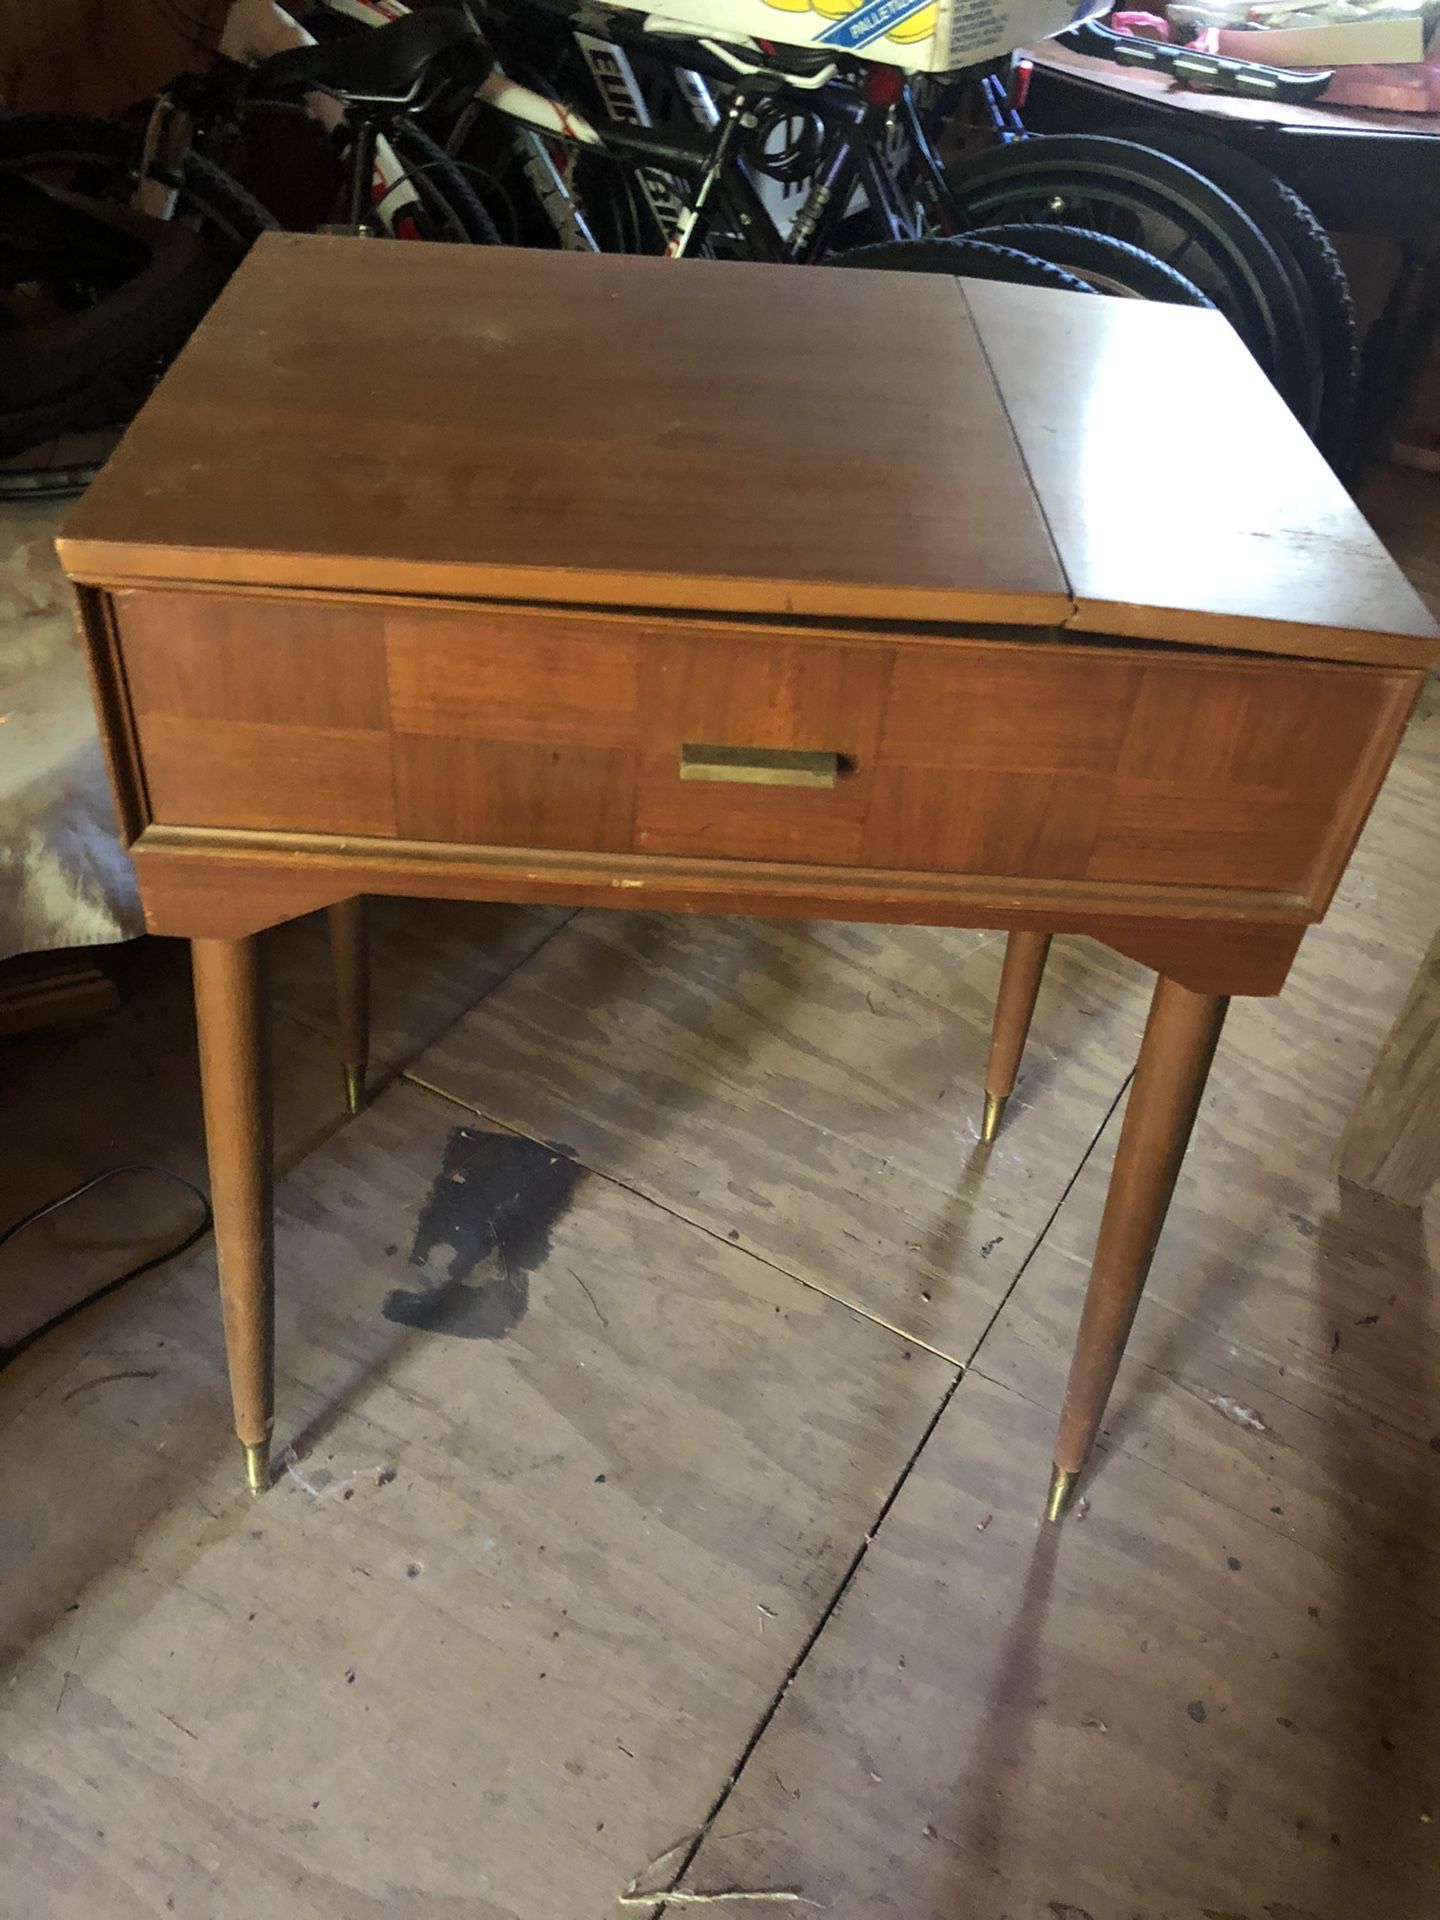 Antique singer sewing machine table